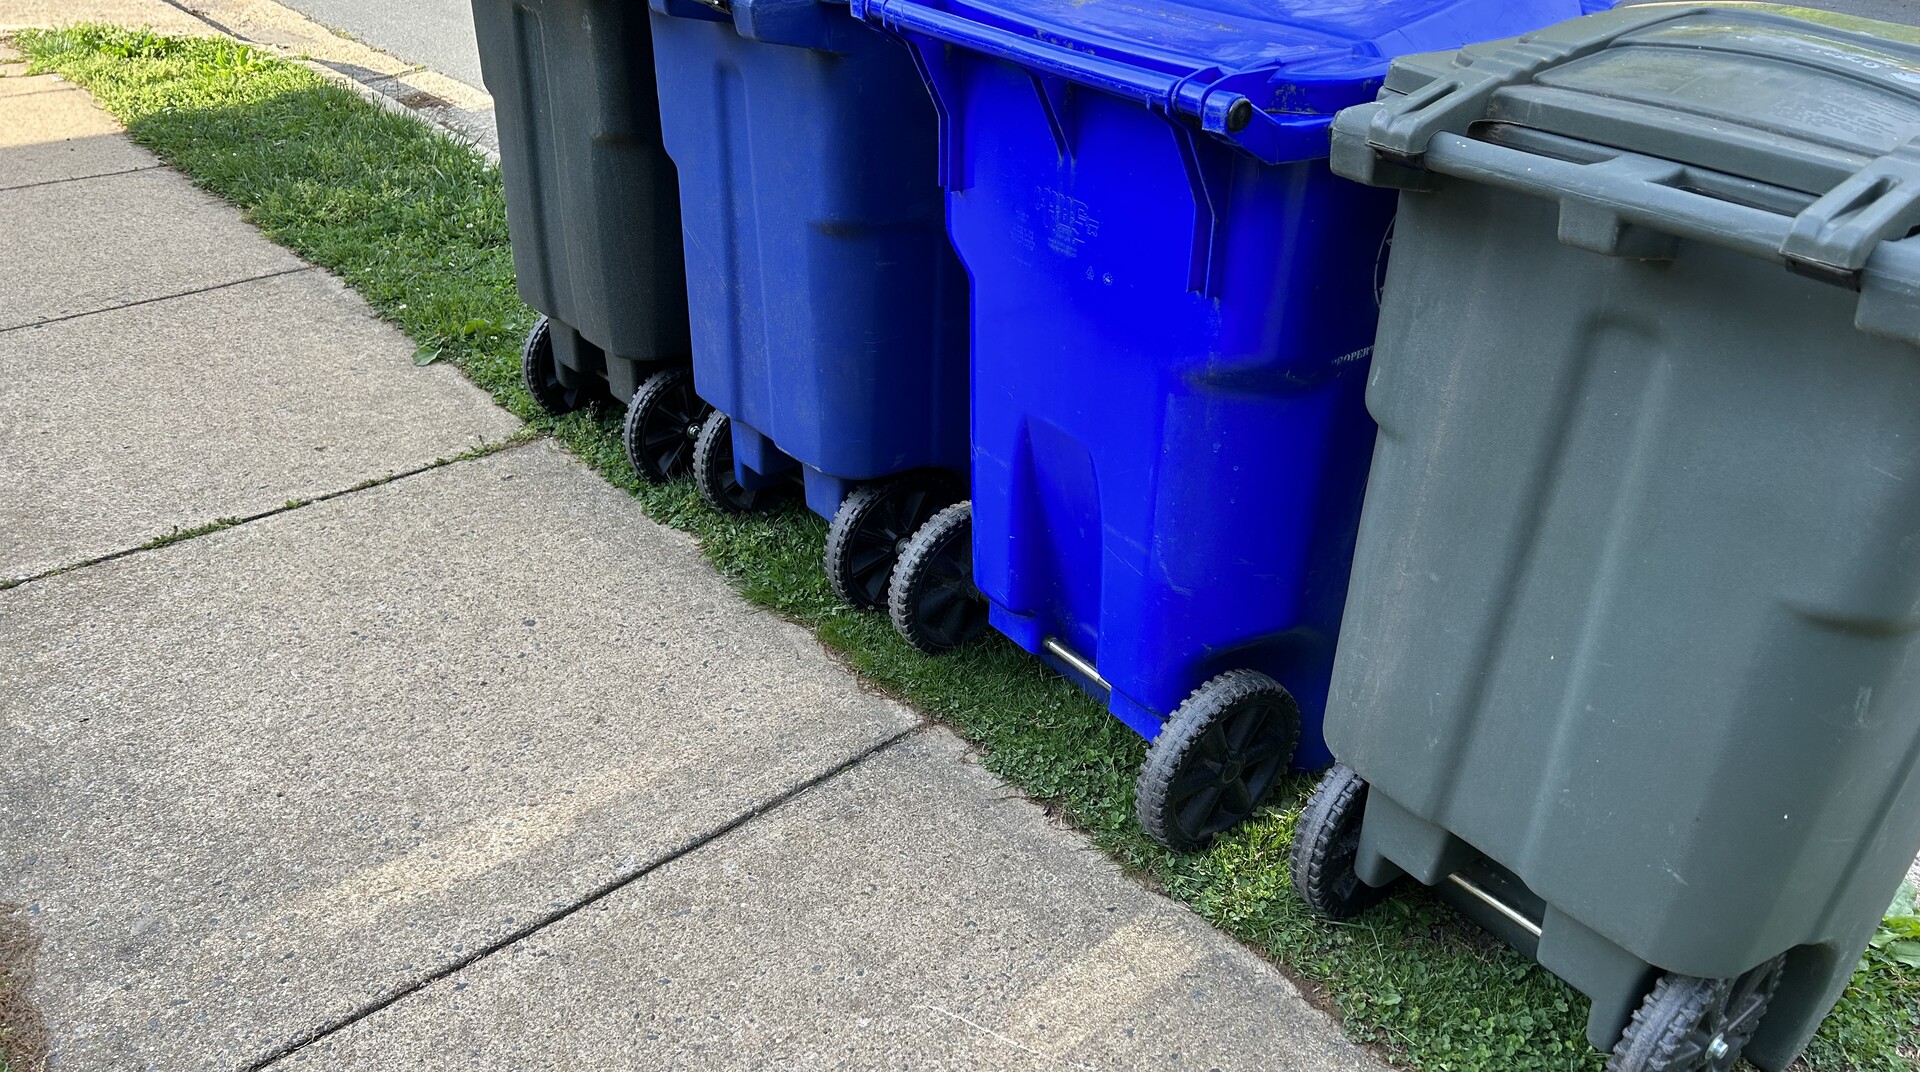 Recycling and trash bins on a curb